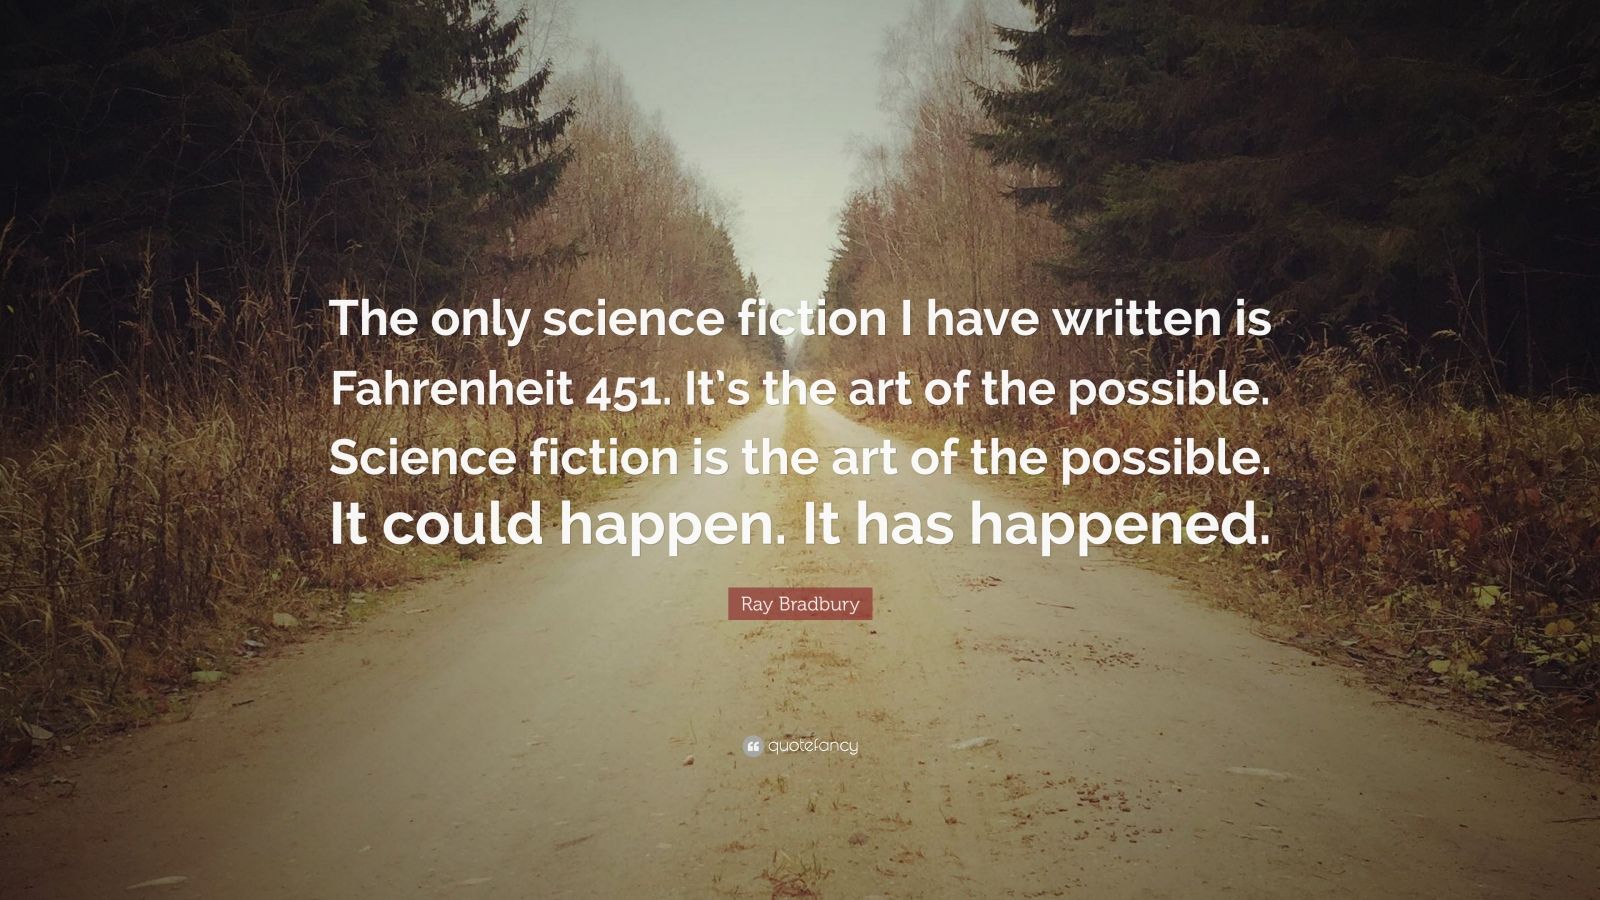 Ray Bradbury Quote “The only science fiction I have written is Fahrenheit 451. It’s the art of